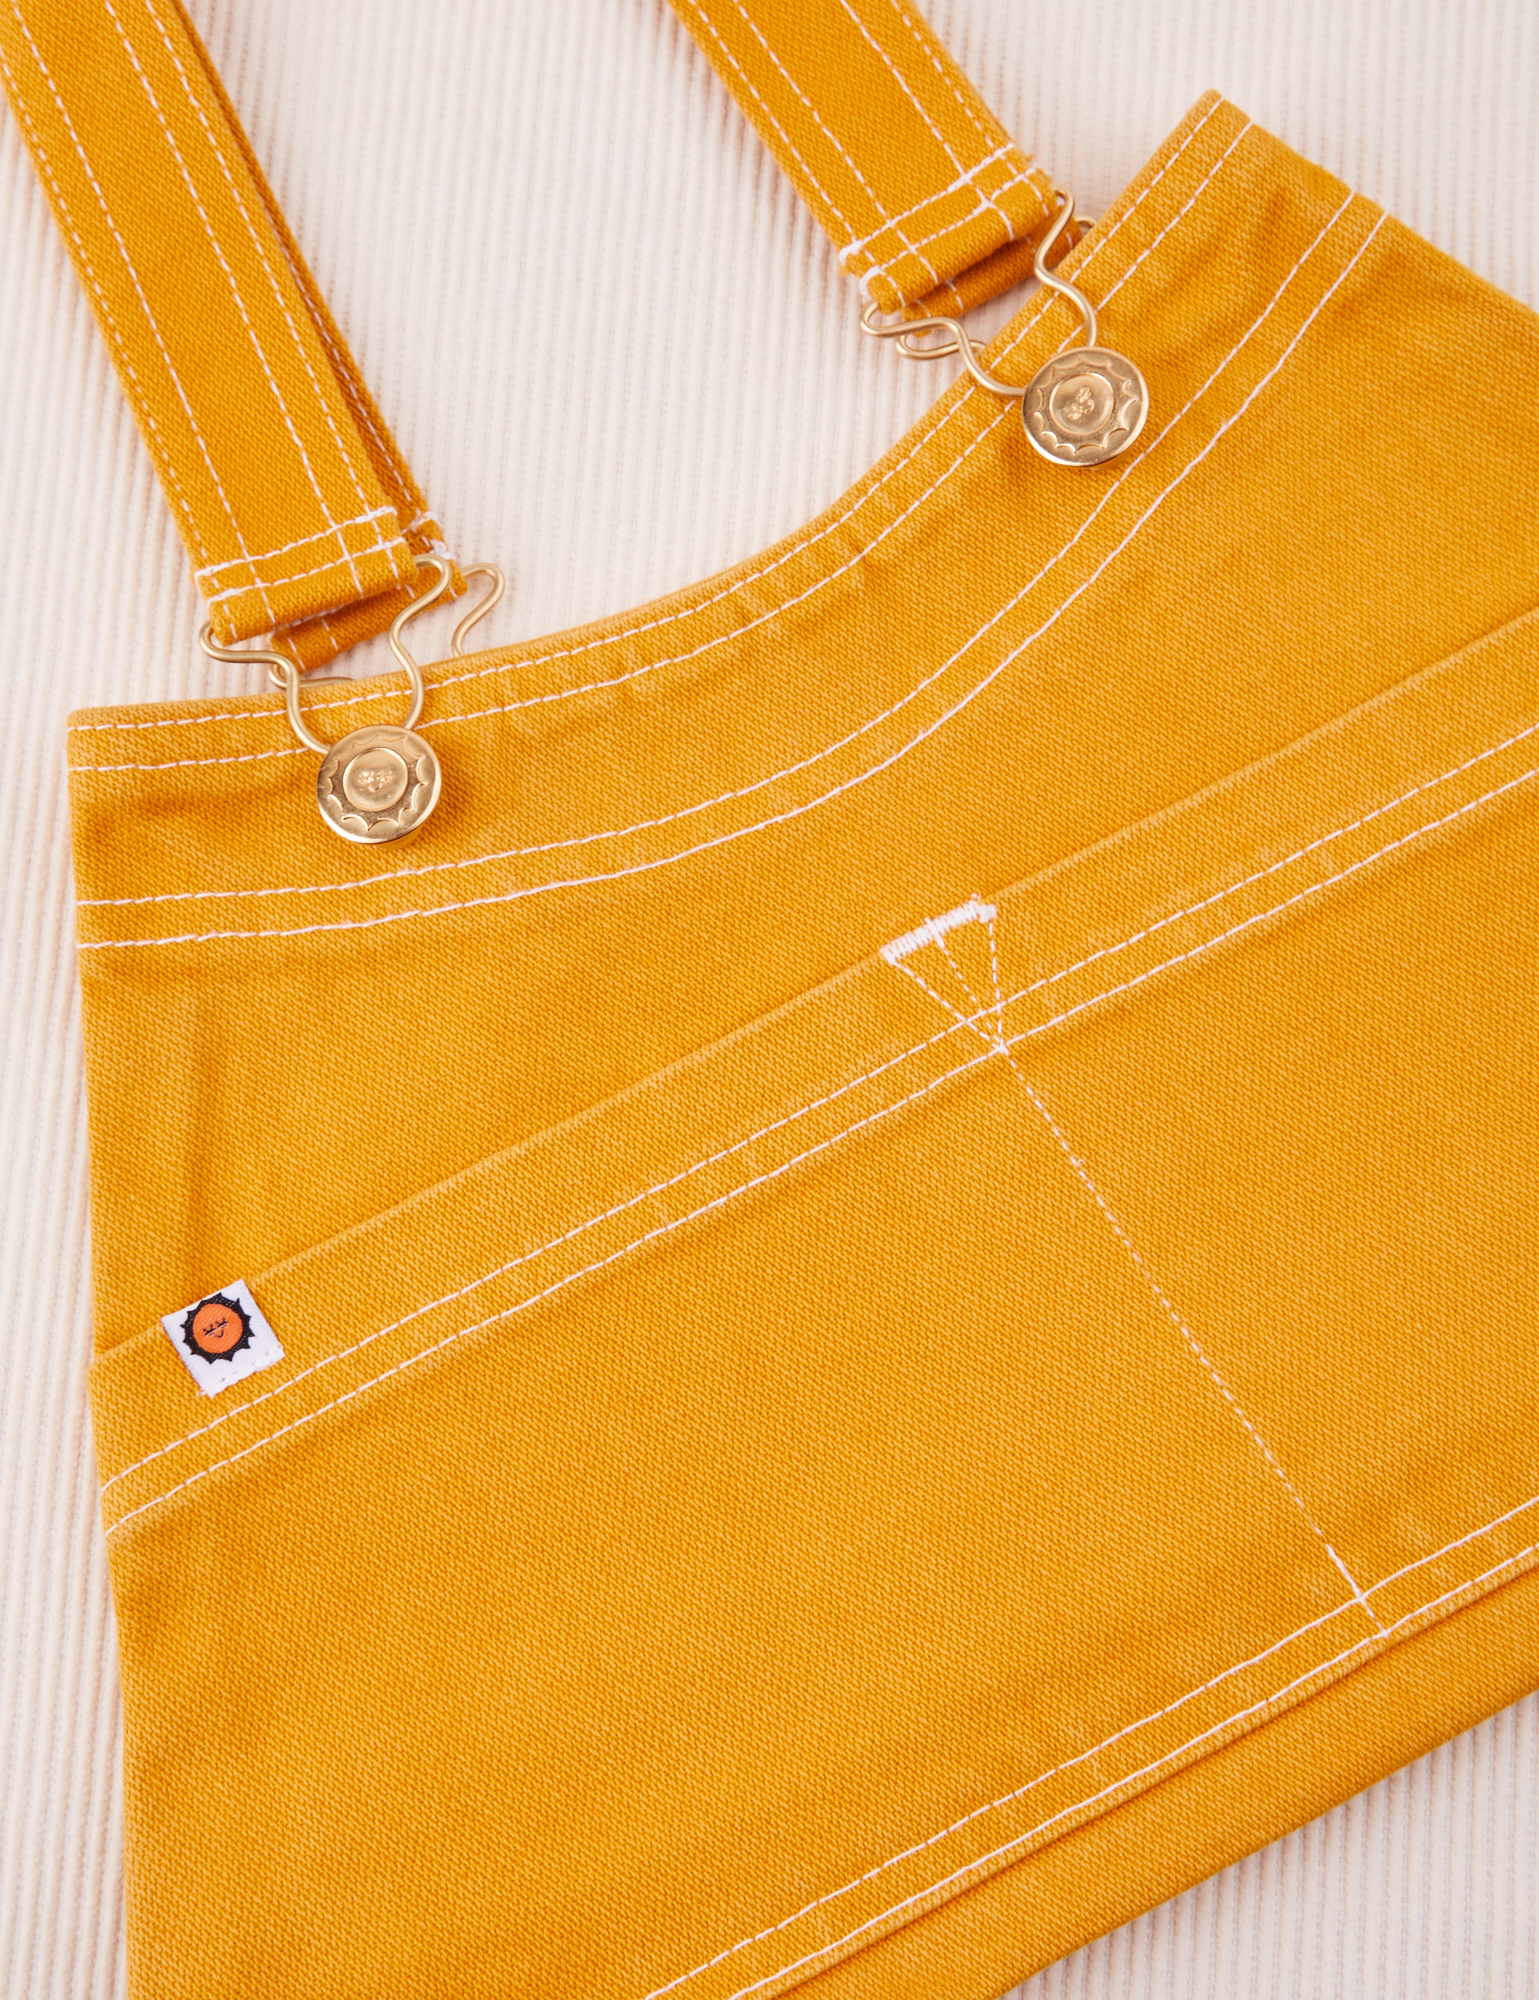 Overall Handbag in Mustard Yellow. Contrast white stitching. Brass sun baby buttons and hardware.